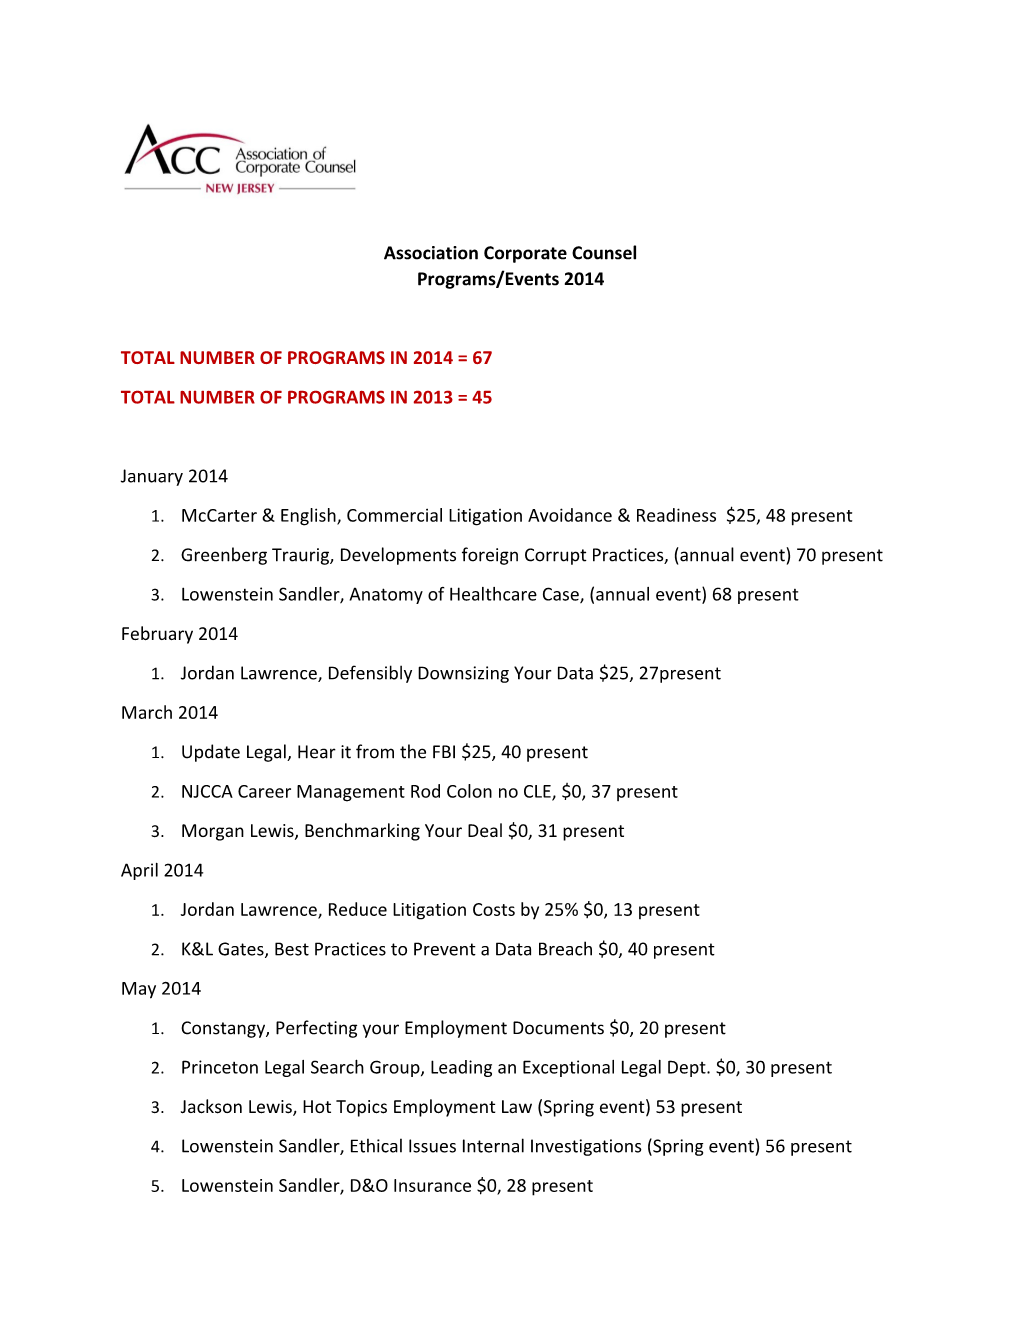 Association Corporate Counsel Programs/Events 2014